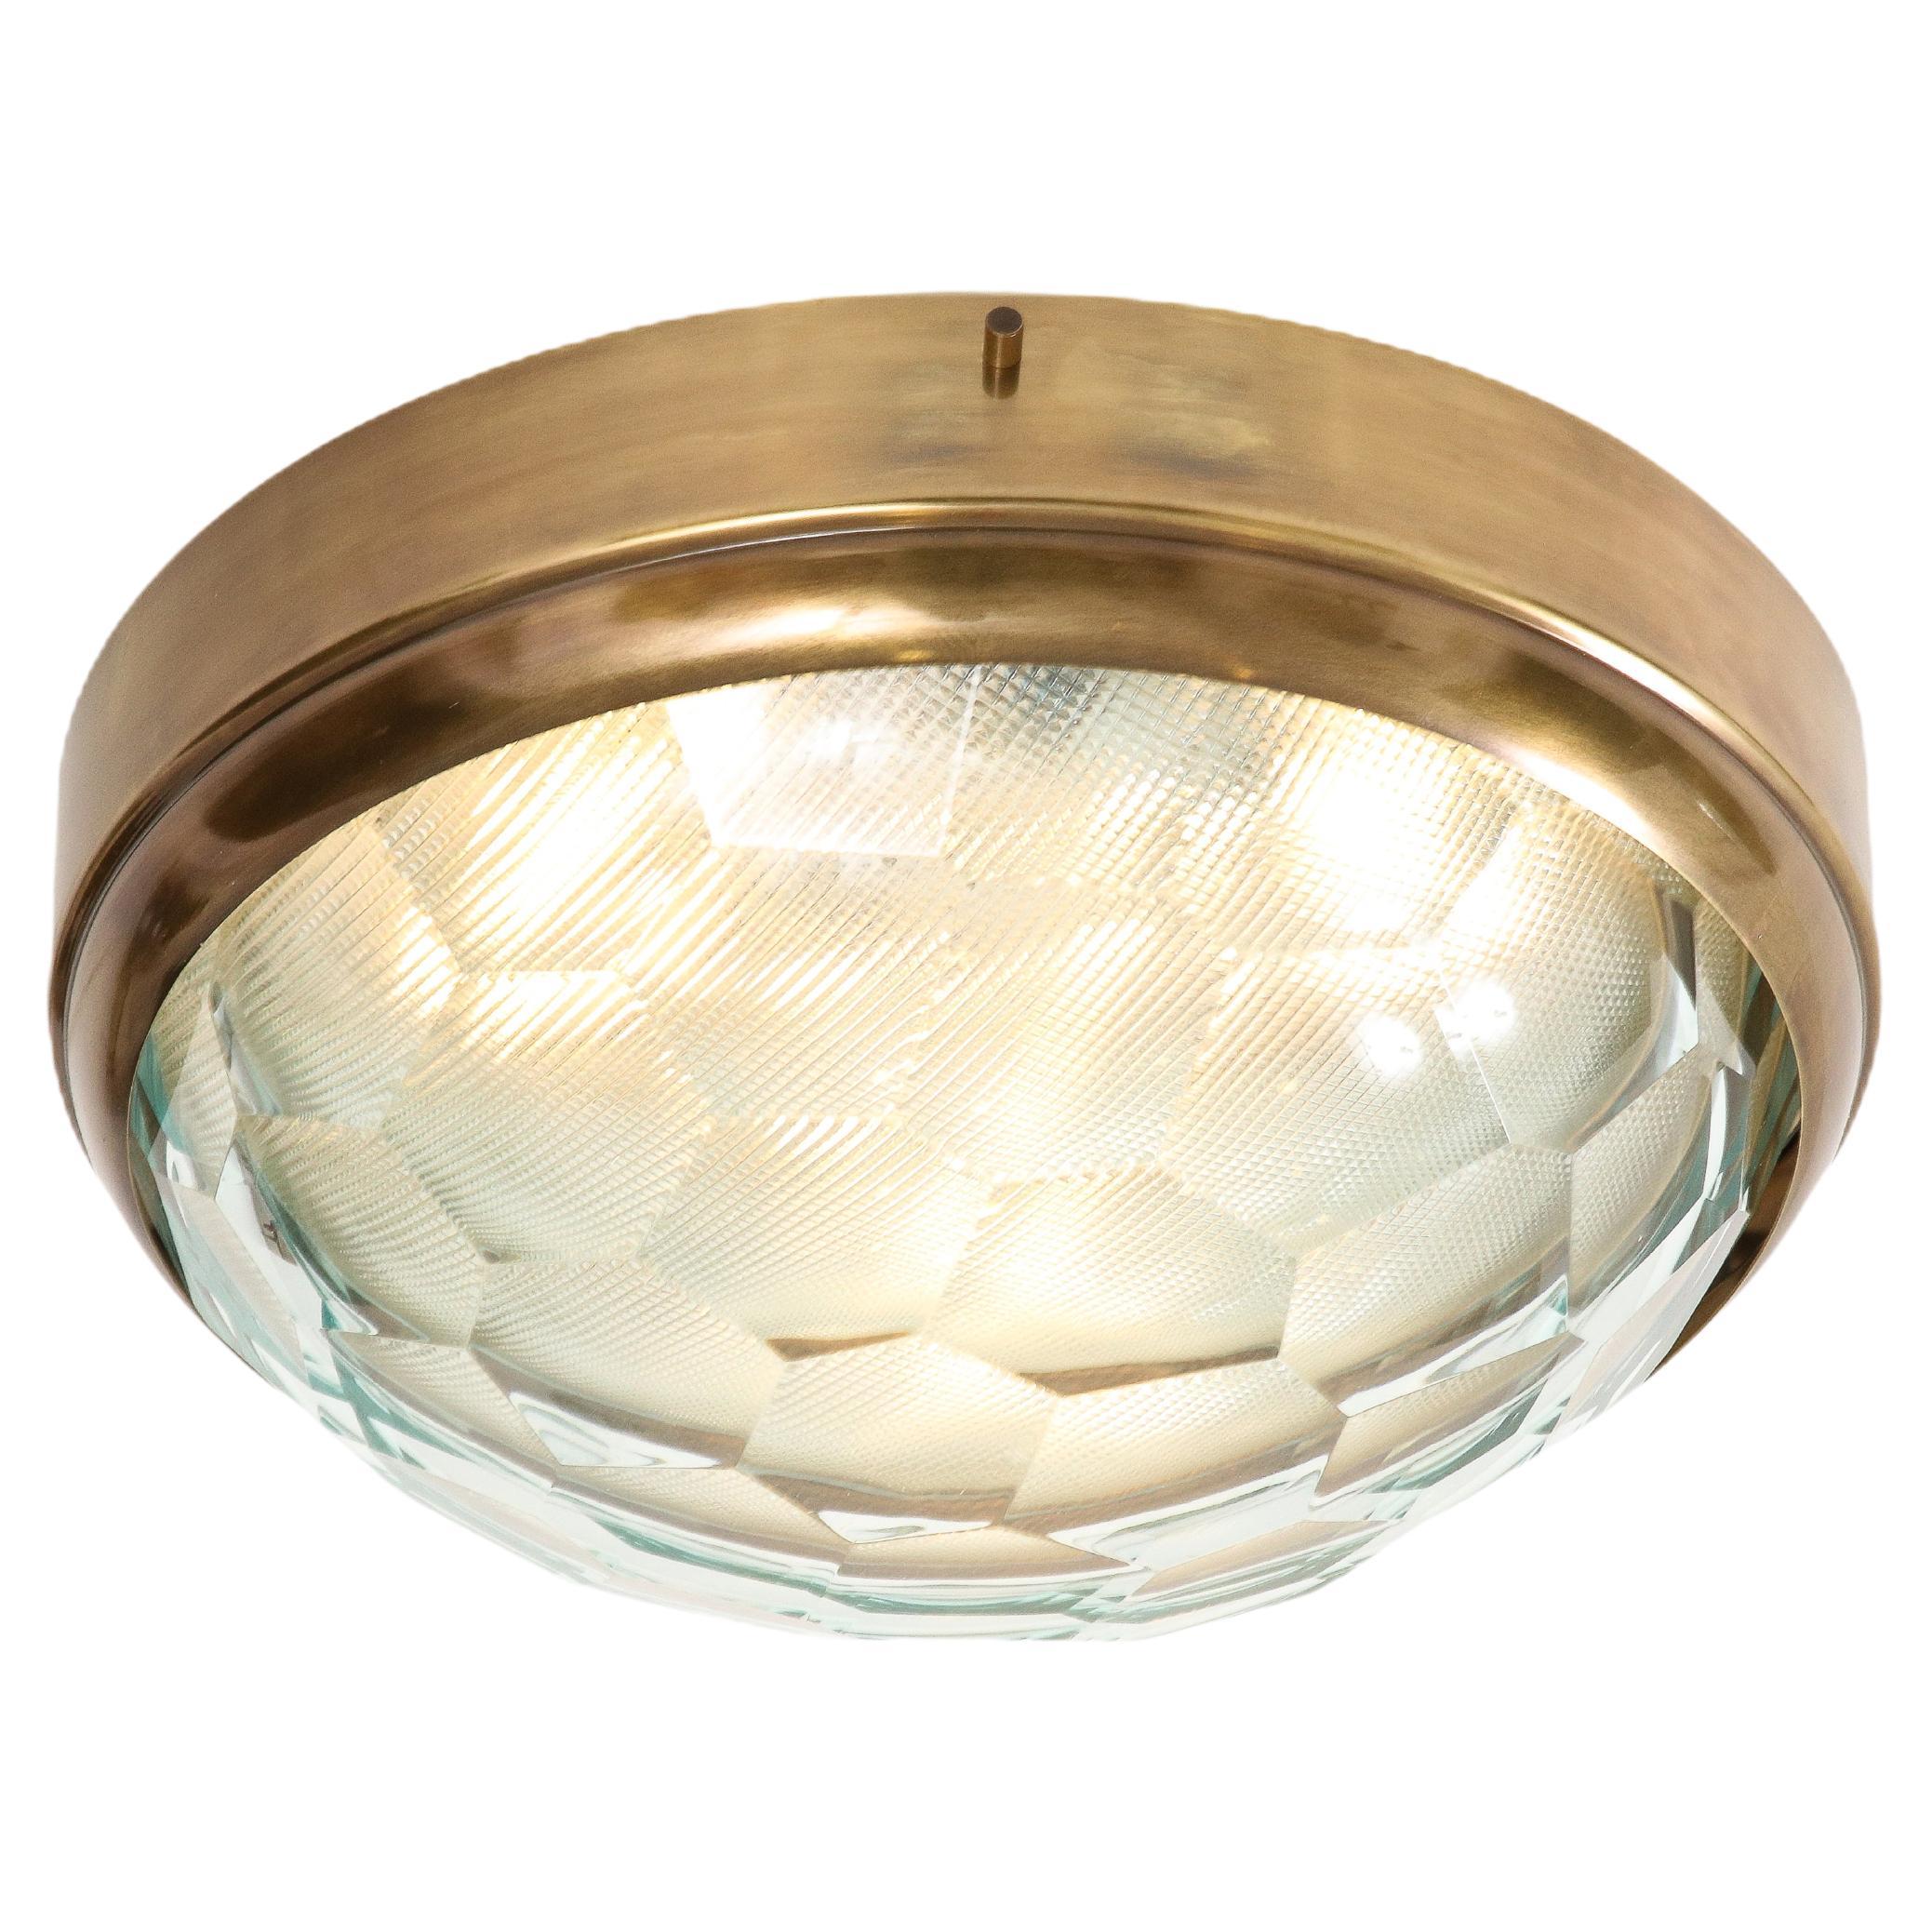 Faceted Glass Flush Mount Ceiling Light in Style of Fontana Arte, 1960s For Sale